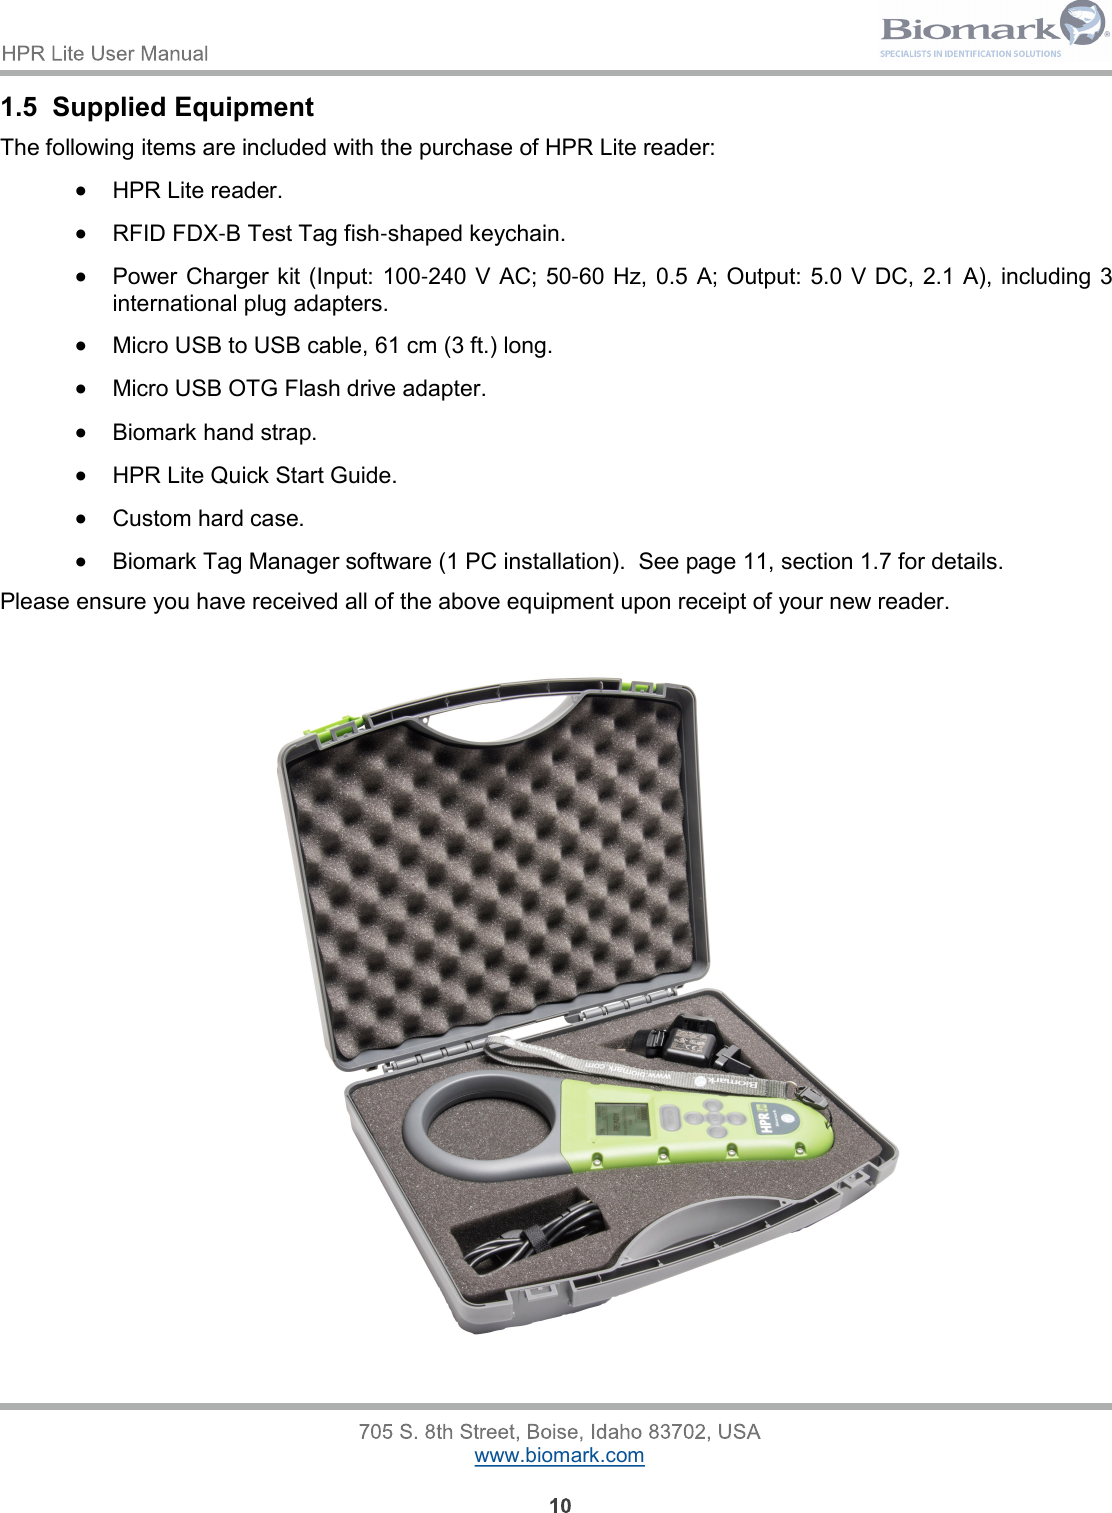 Page 10 of Allflex USA 30012 Handheld Pit Tag reader with Bluetooth function User Manual HPR Lite